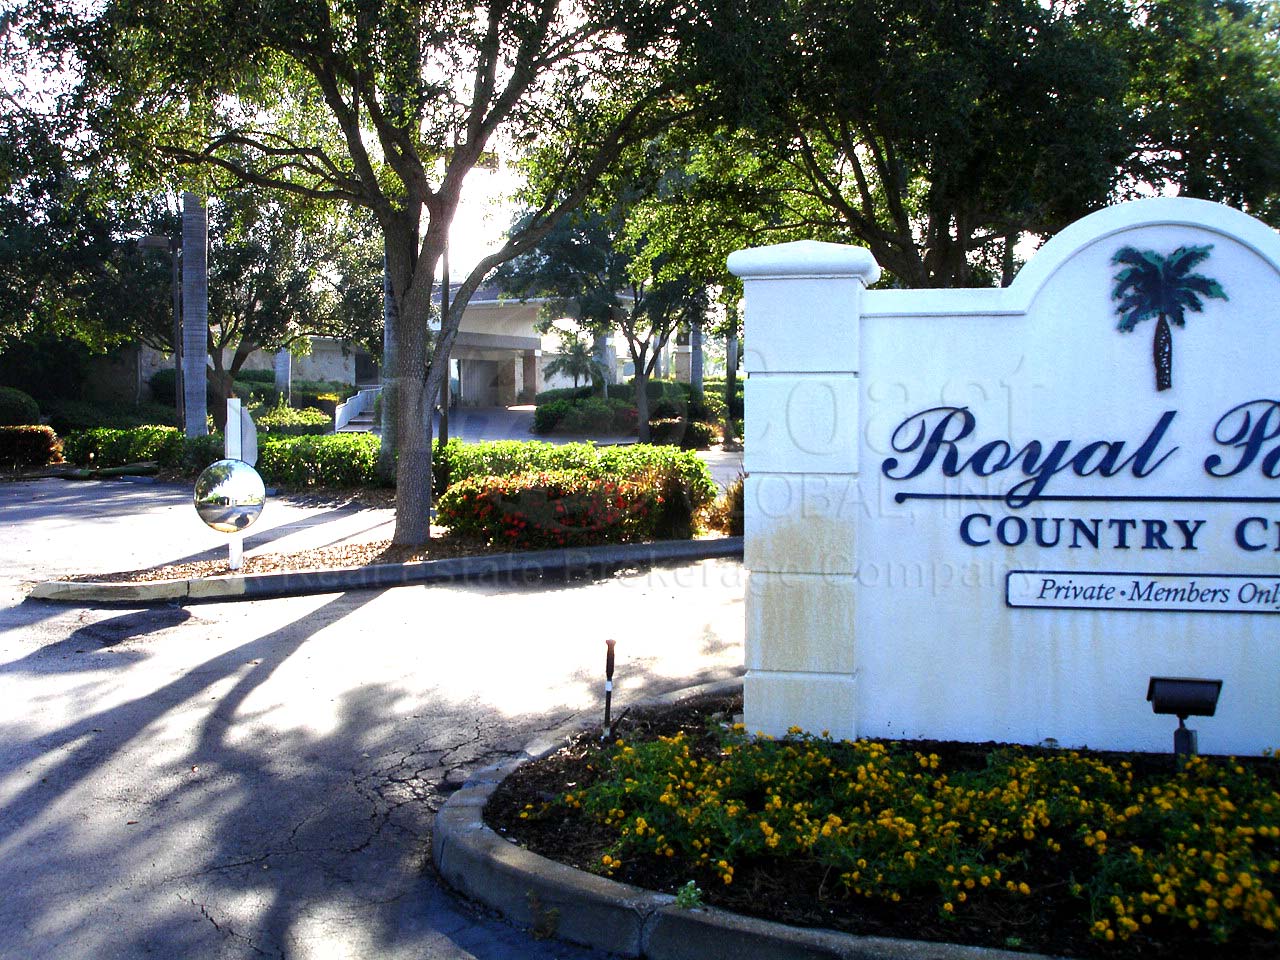 ROYAL PALM COUNTRY CLUB Signage